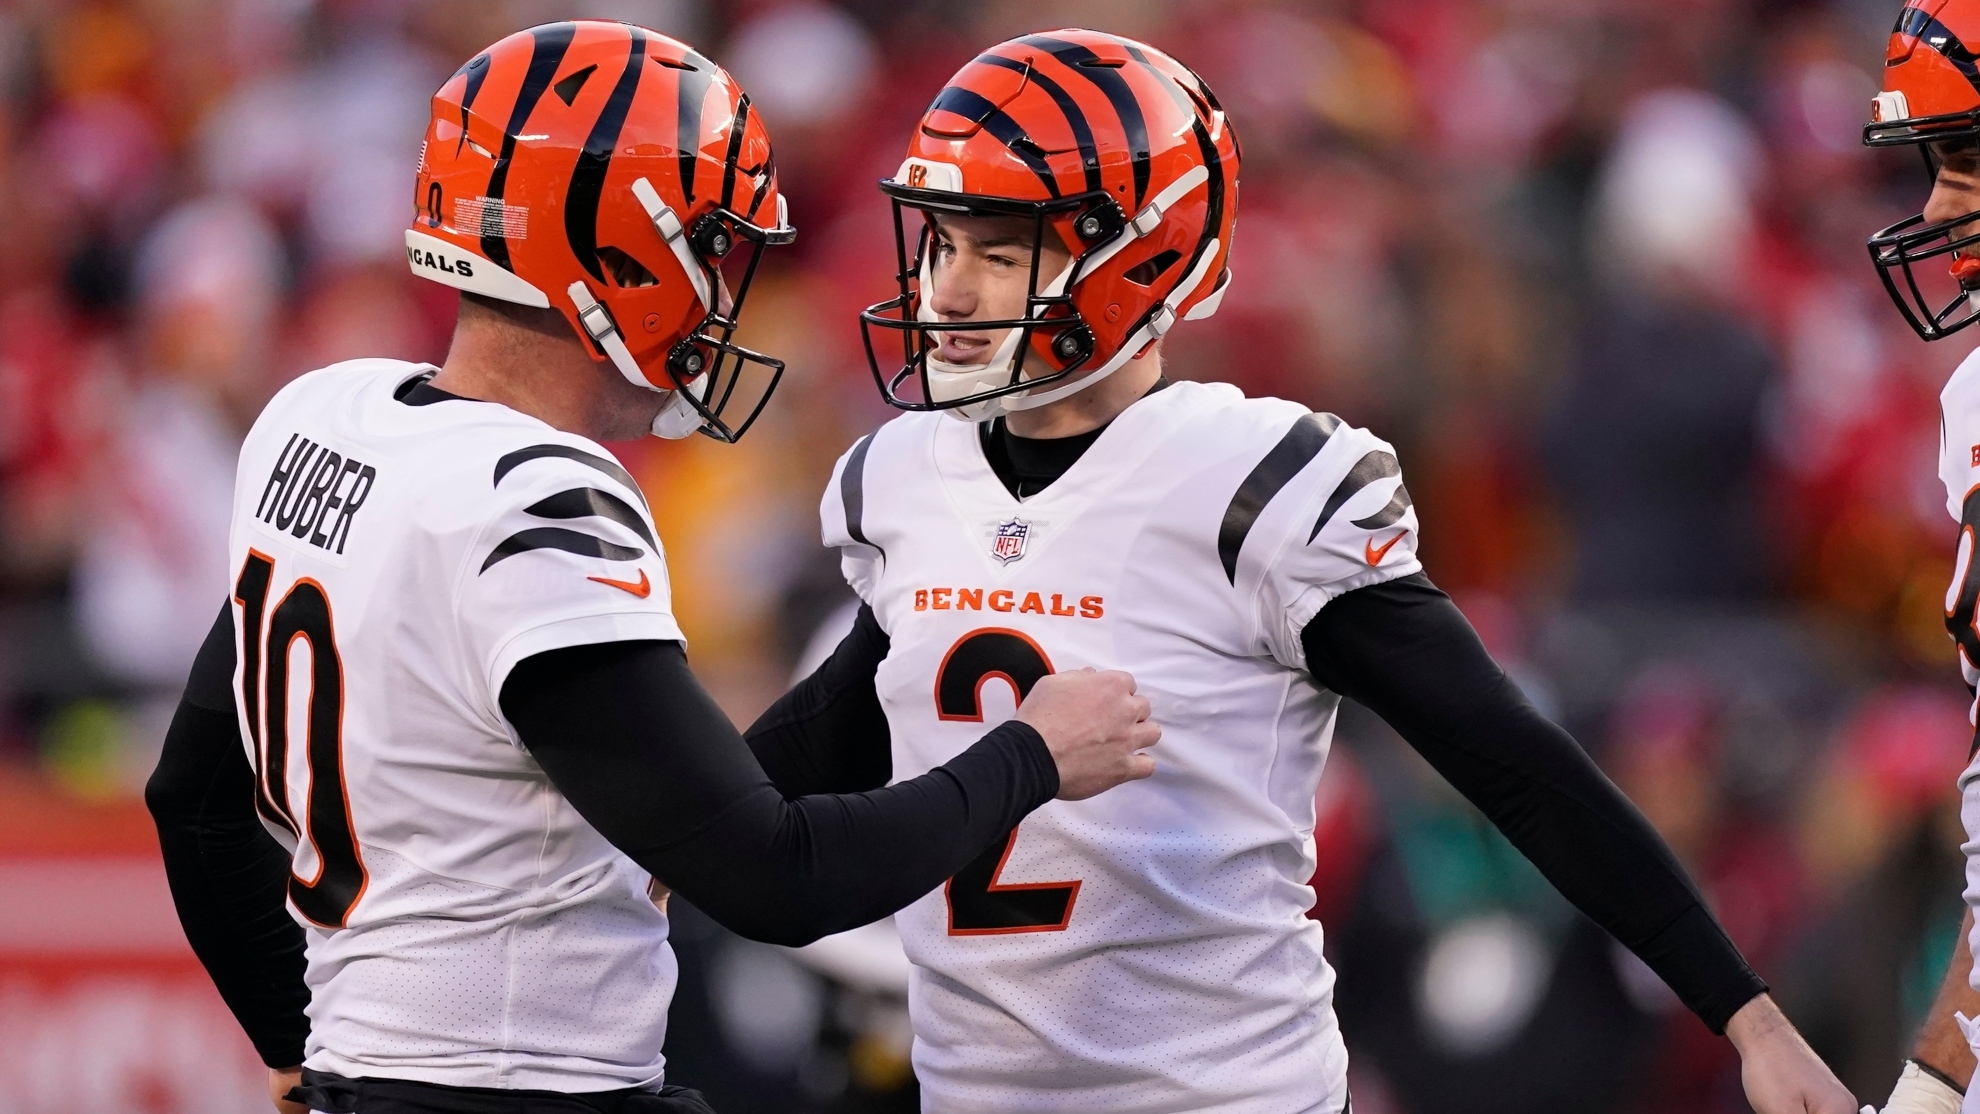 Cincinnati Bengals kicker Evan McPherson (2) celebrates with teammate Kevin Huber (10) after kicking a 52-yard field goal during the second half of the AFC championship NFL football game against the Kansas City Chiefs